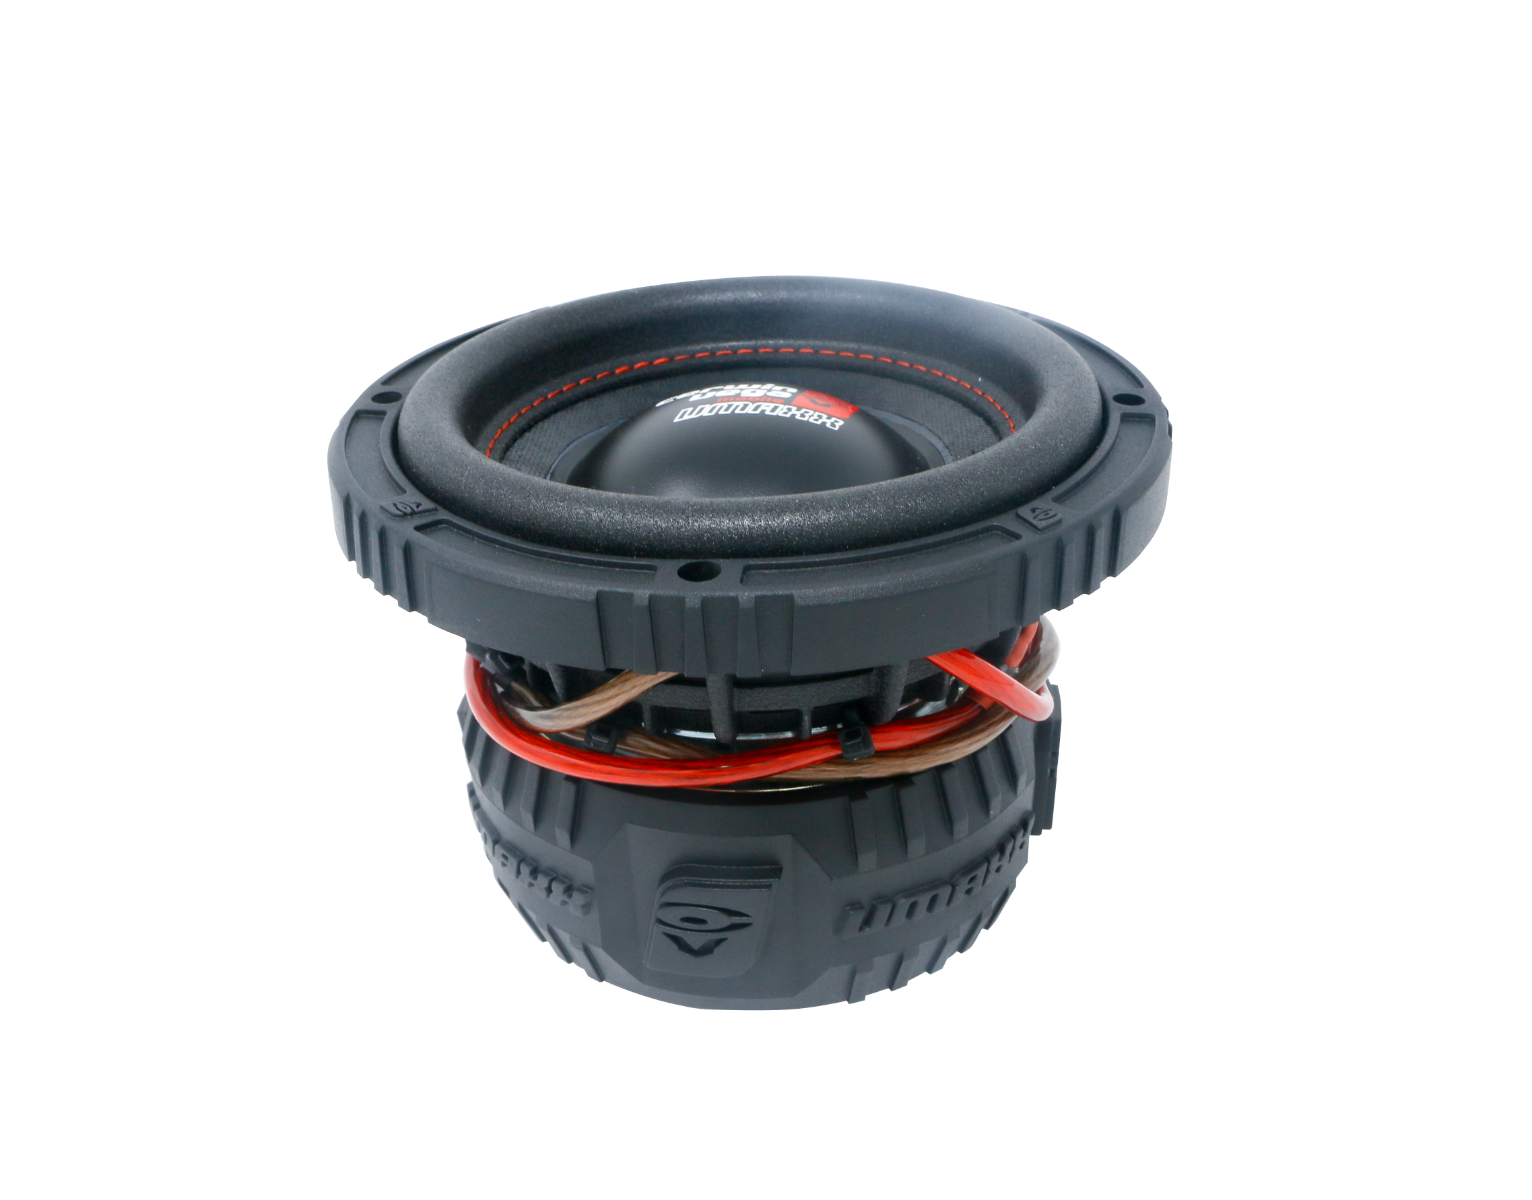 6.5 Inch High Performance Car Audio Subwoofer